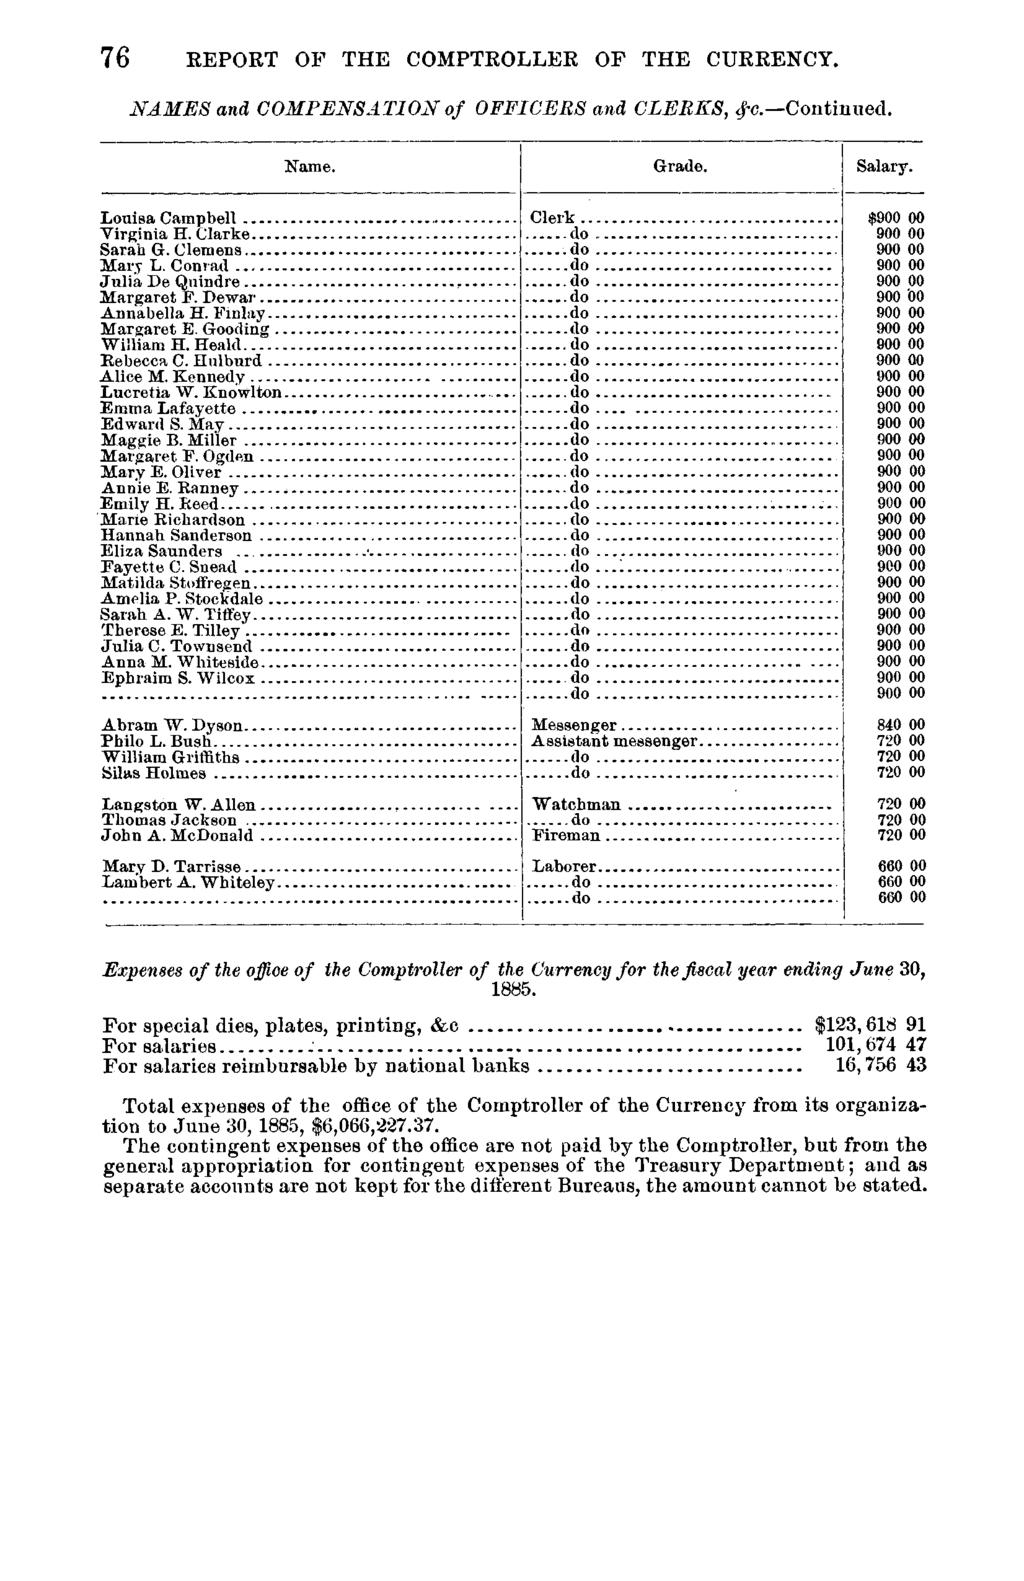 76 EEPORT OF THE COMPTKOLLER OF THE CURRENCY. NAMES and COMPENSATION of OFFICERS and CLERKS, #c Continued. Louisa Campbell Virginia H. Clarke Sarah G. Clemens Mary L. Conrad.